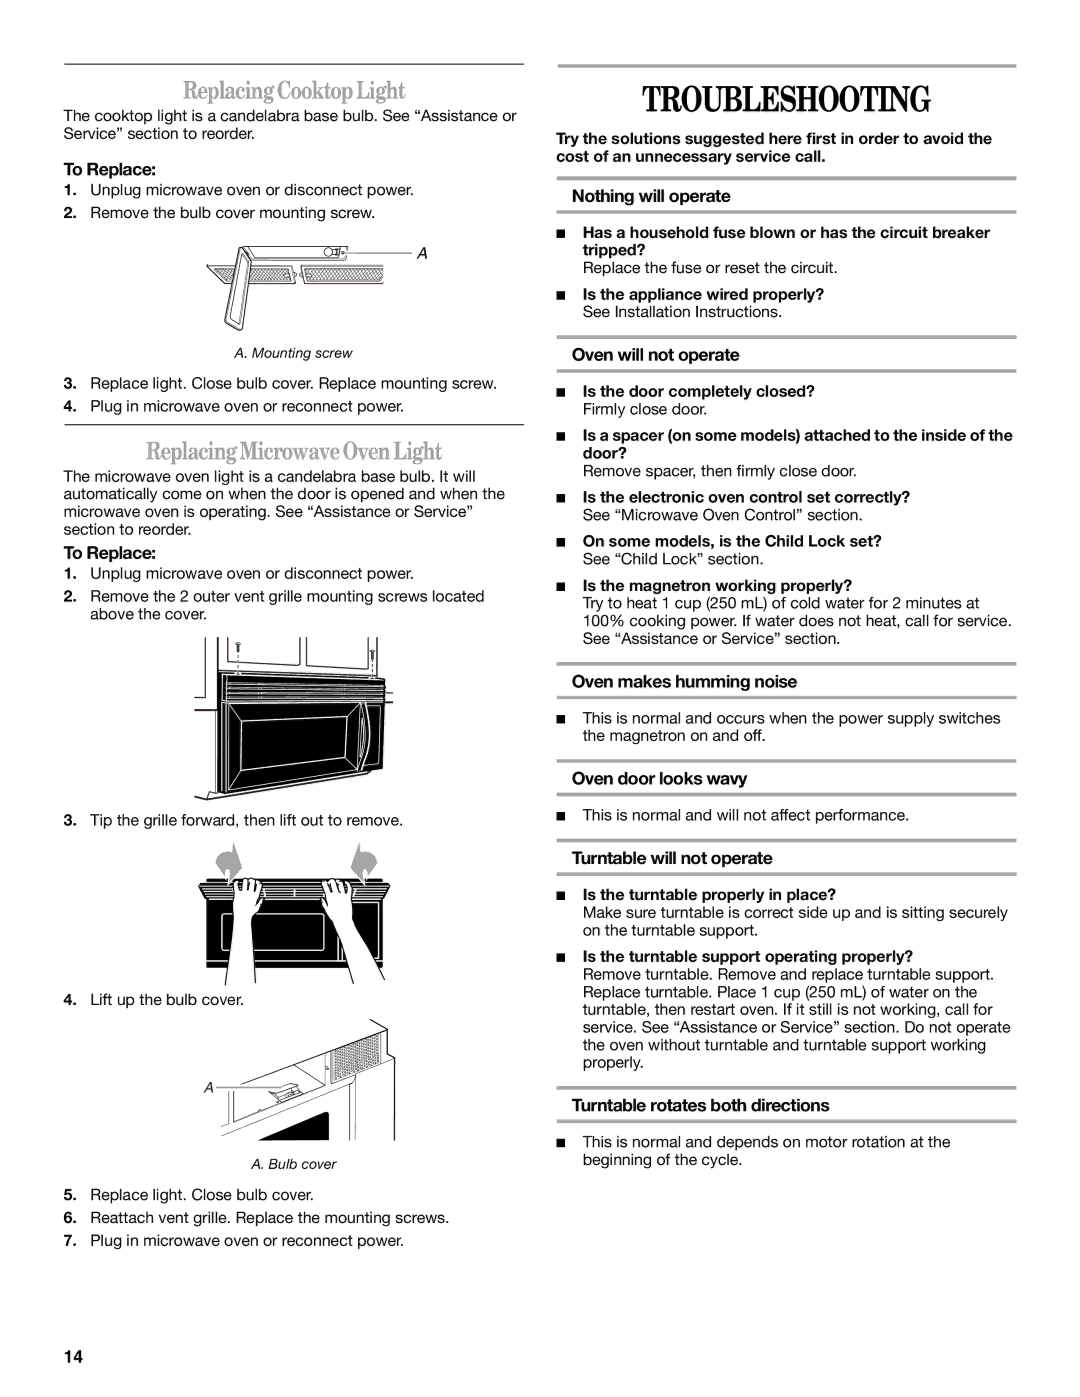 Whirlpool MH2155XP manual Troubleshooting, Replacing Cooktop Light, Replacing Microwave OvenLight 